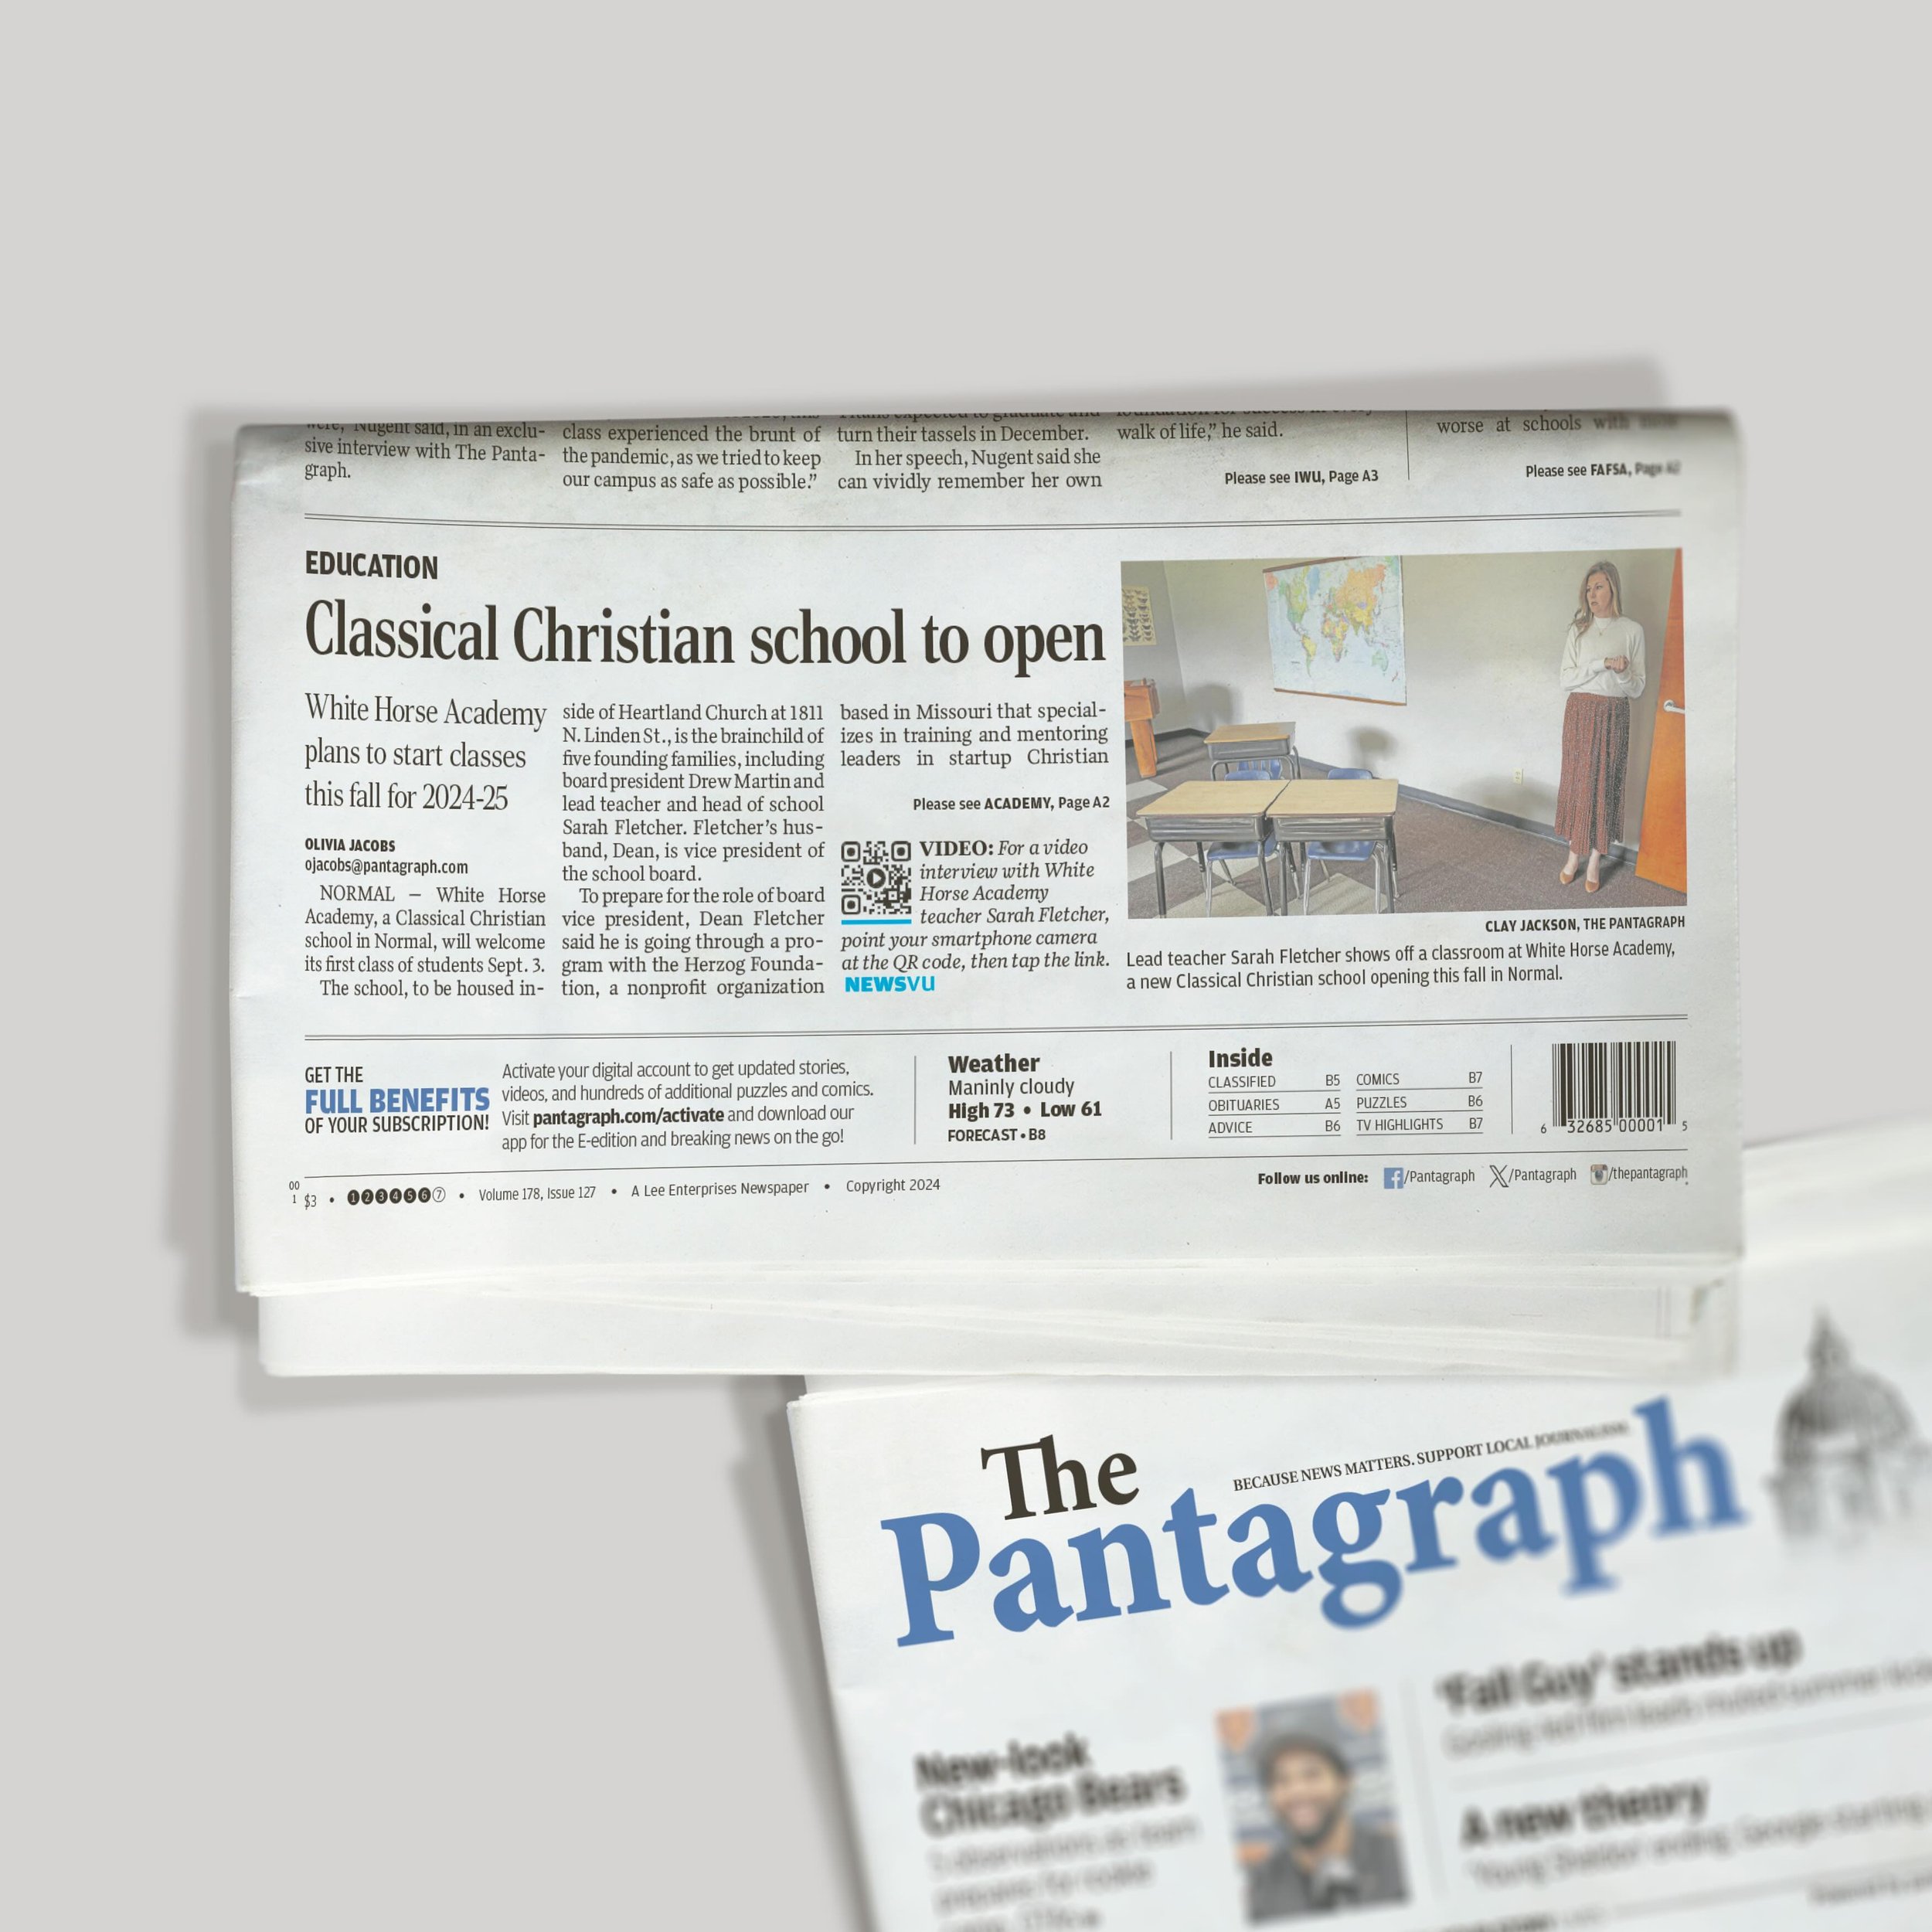 It&rsquo;s humbling to consider all God has done the past two years. We are grateful to the Pantagraph for highlighting White Horse Academy in today&rsquo;s edition of its paper!